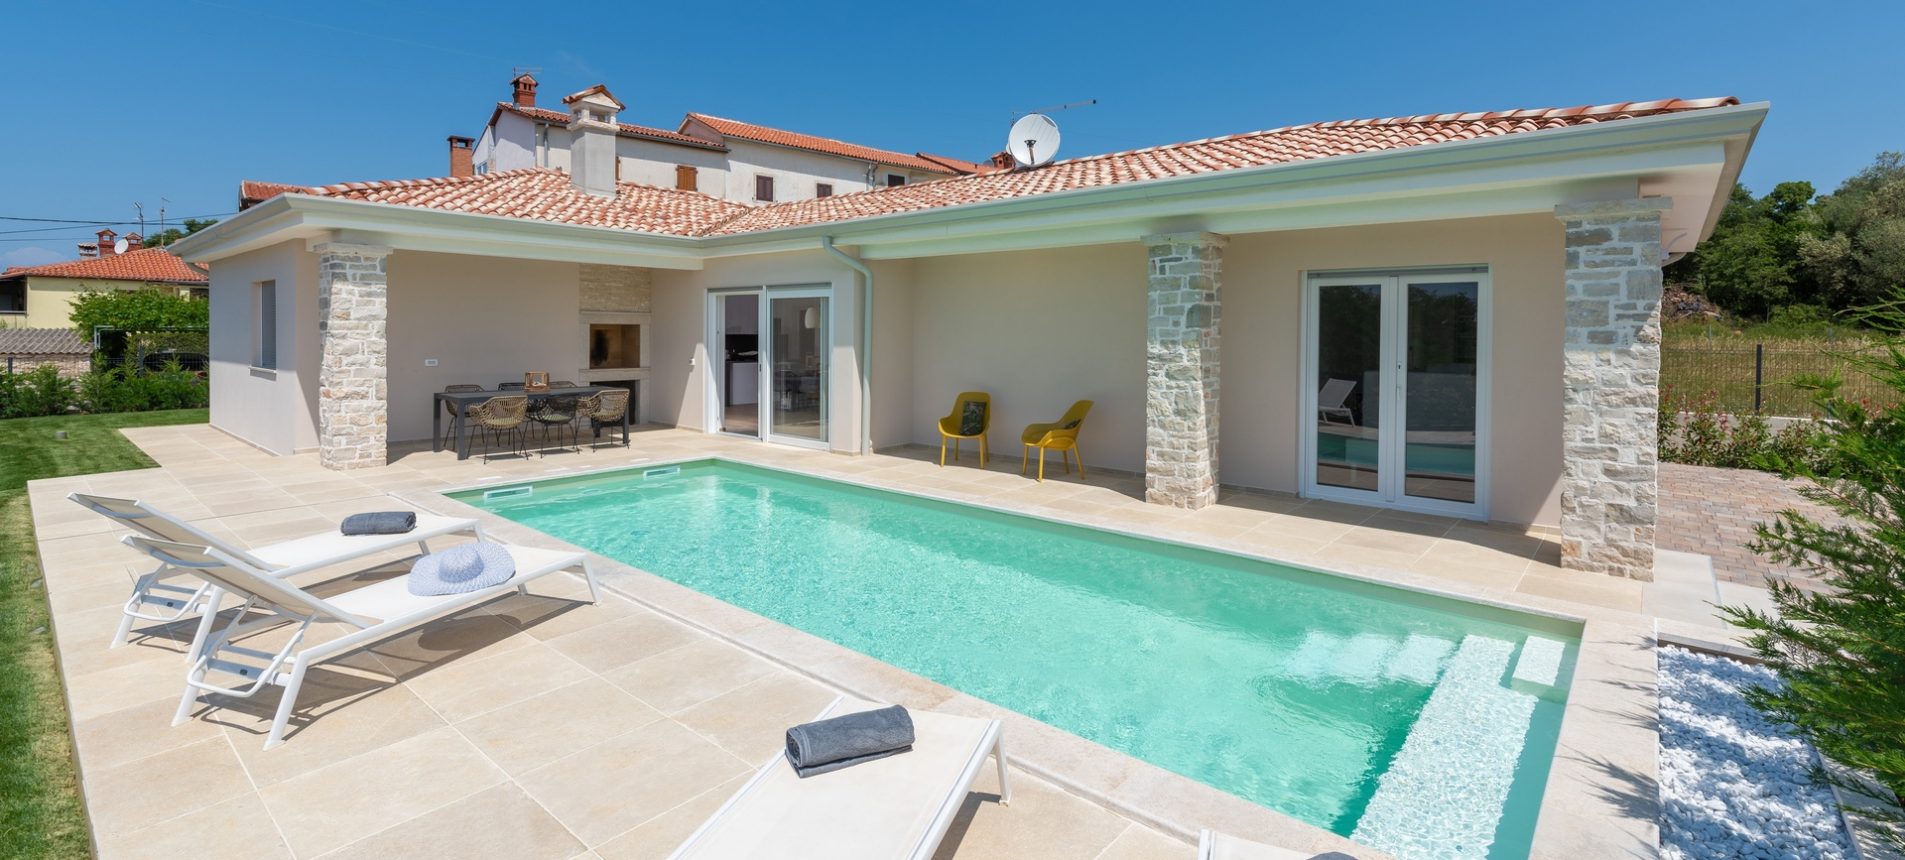 Charming Villa Audrey with an outdoor pool